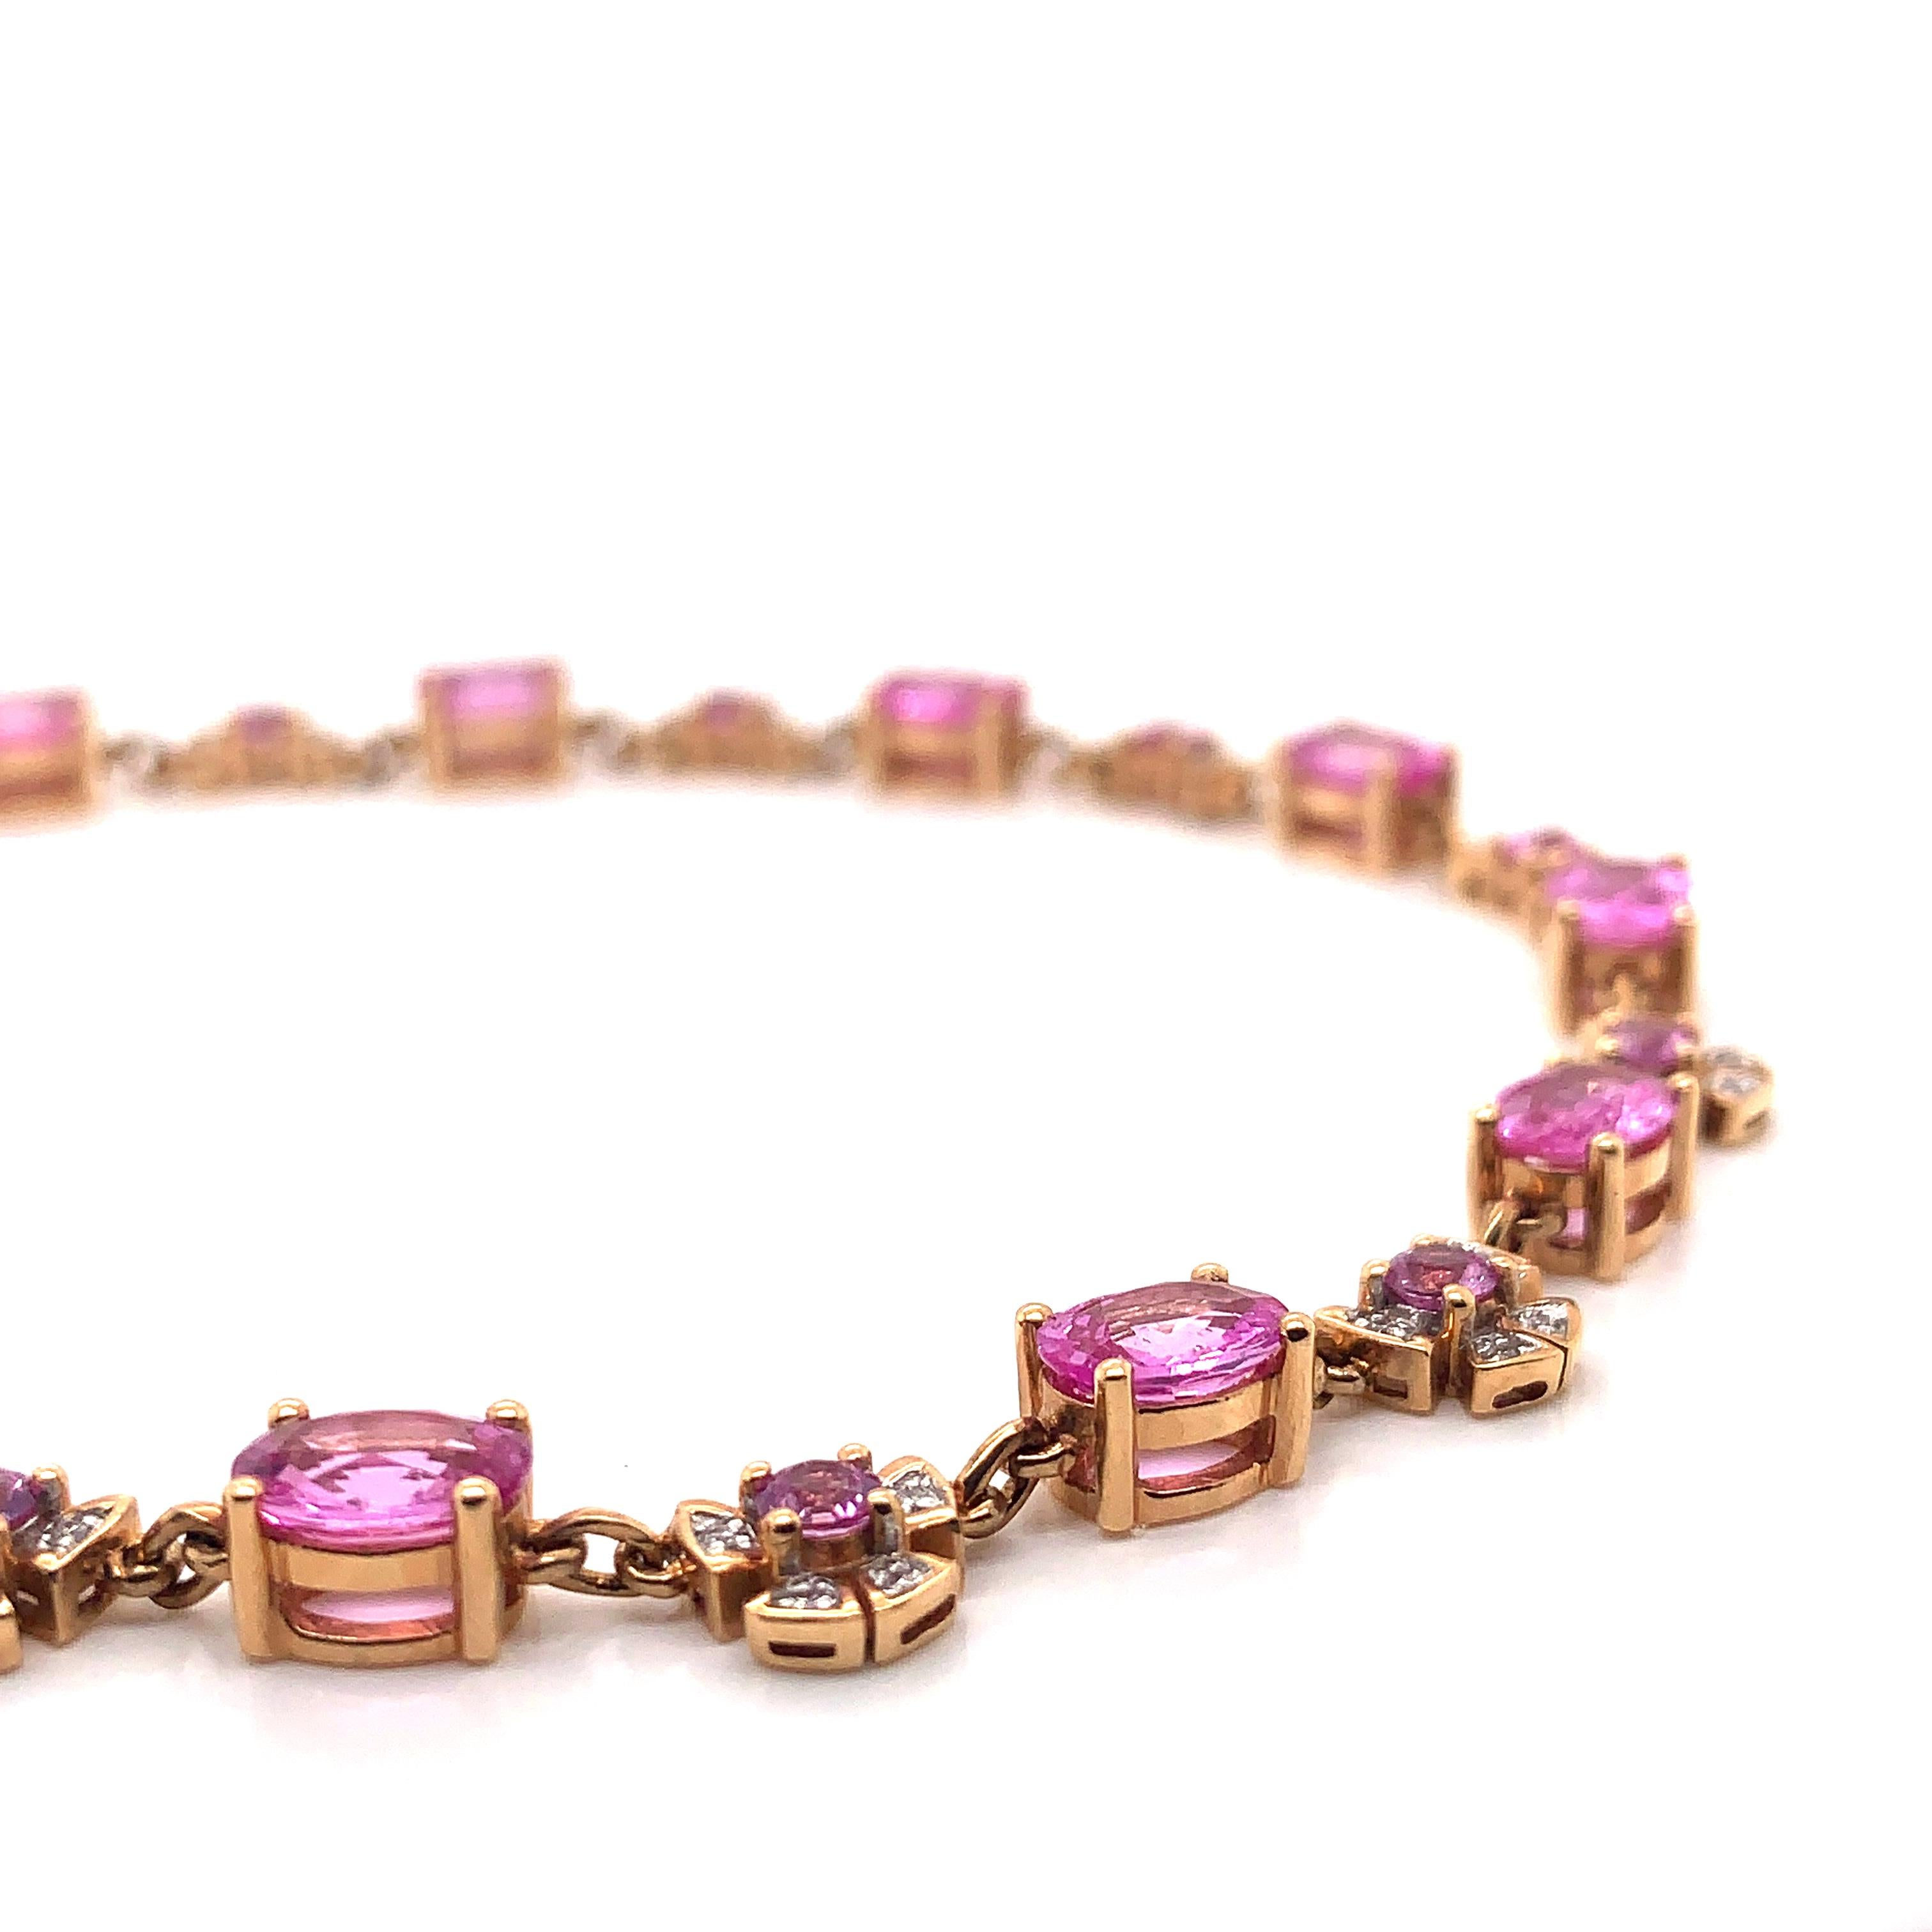 Oval Cut 19.47 Carat Pink Sapphire Necklace in 18 Karat Rose Gold with Diamonds